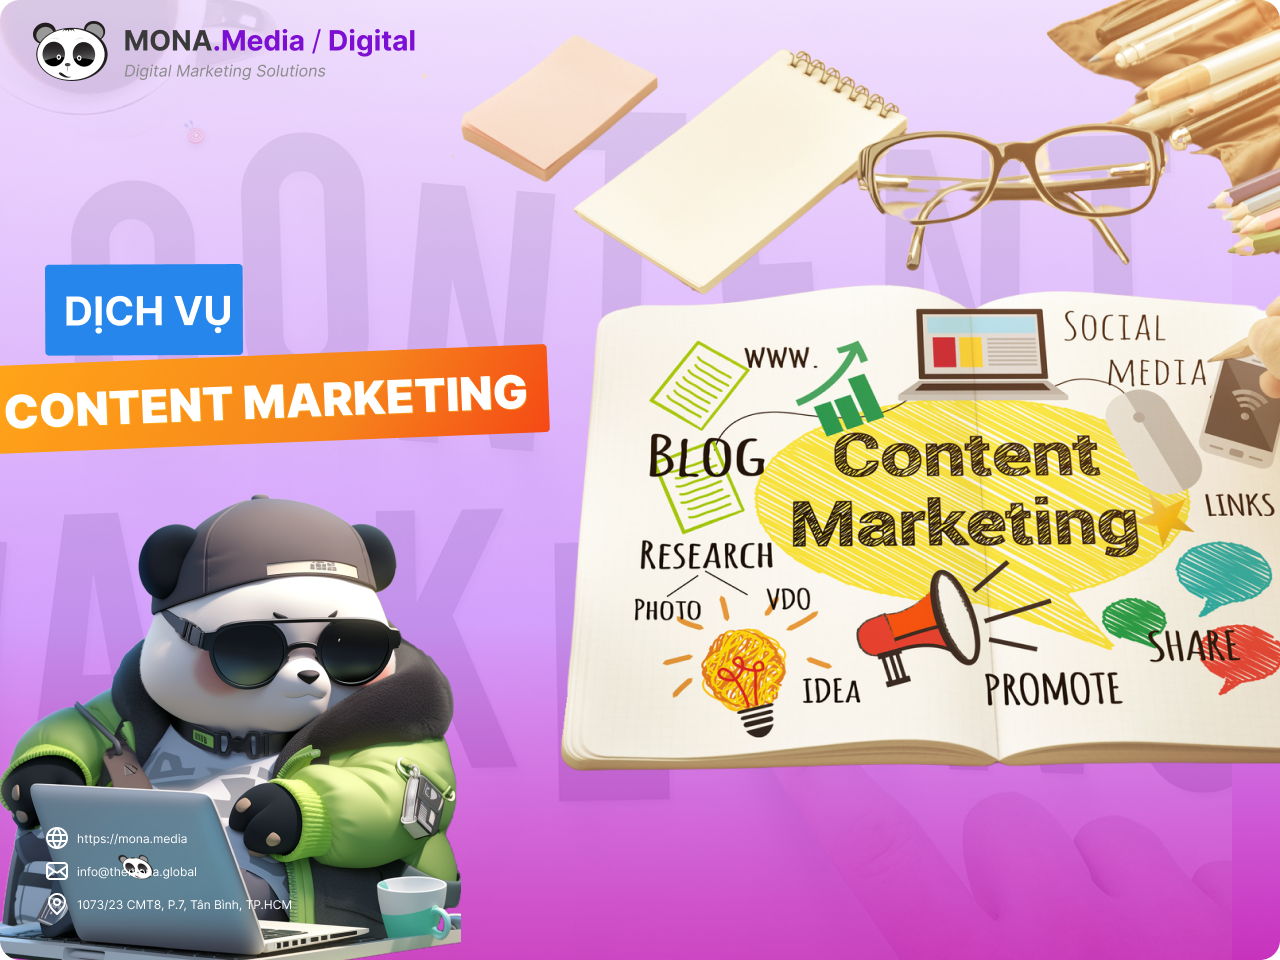 Dịch vụ content marketing